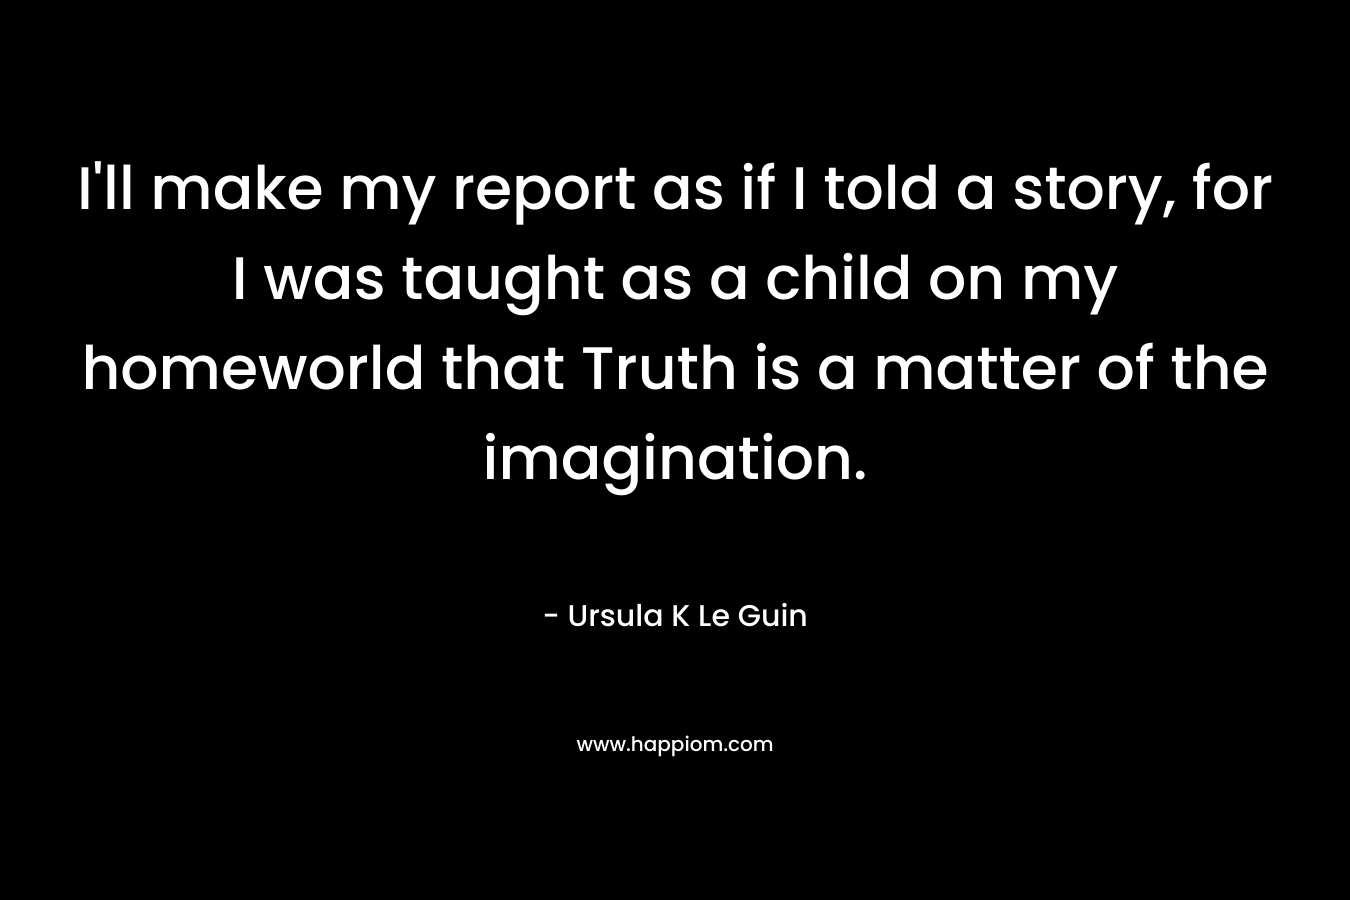 I'll make my report as if I told a story, for I was taught as a child on my homeworld that Truth is a matter of the imagination.